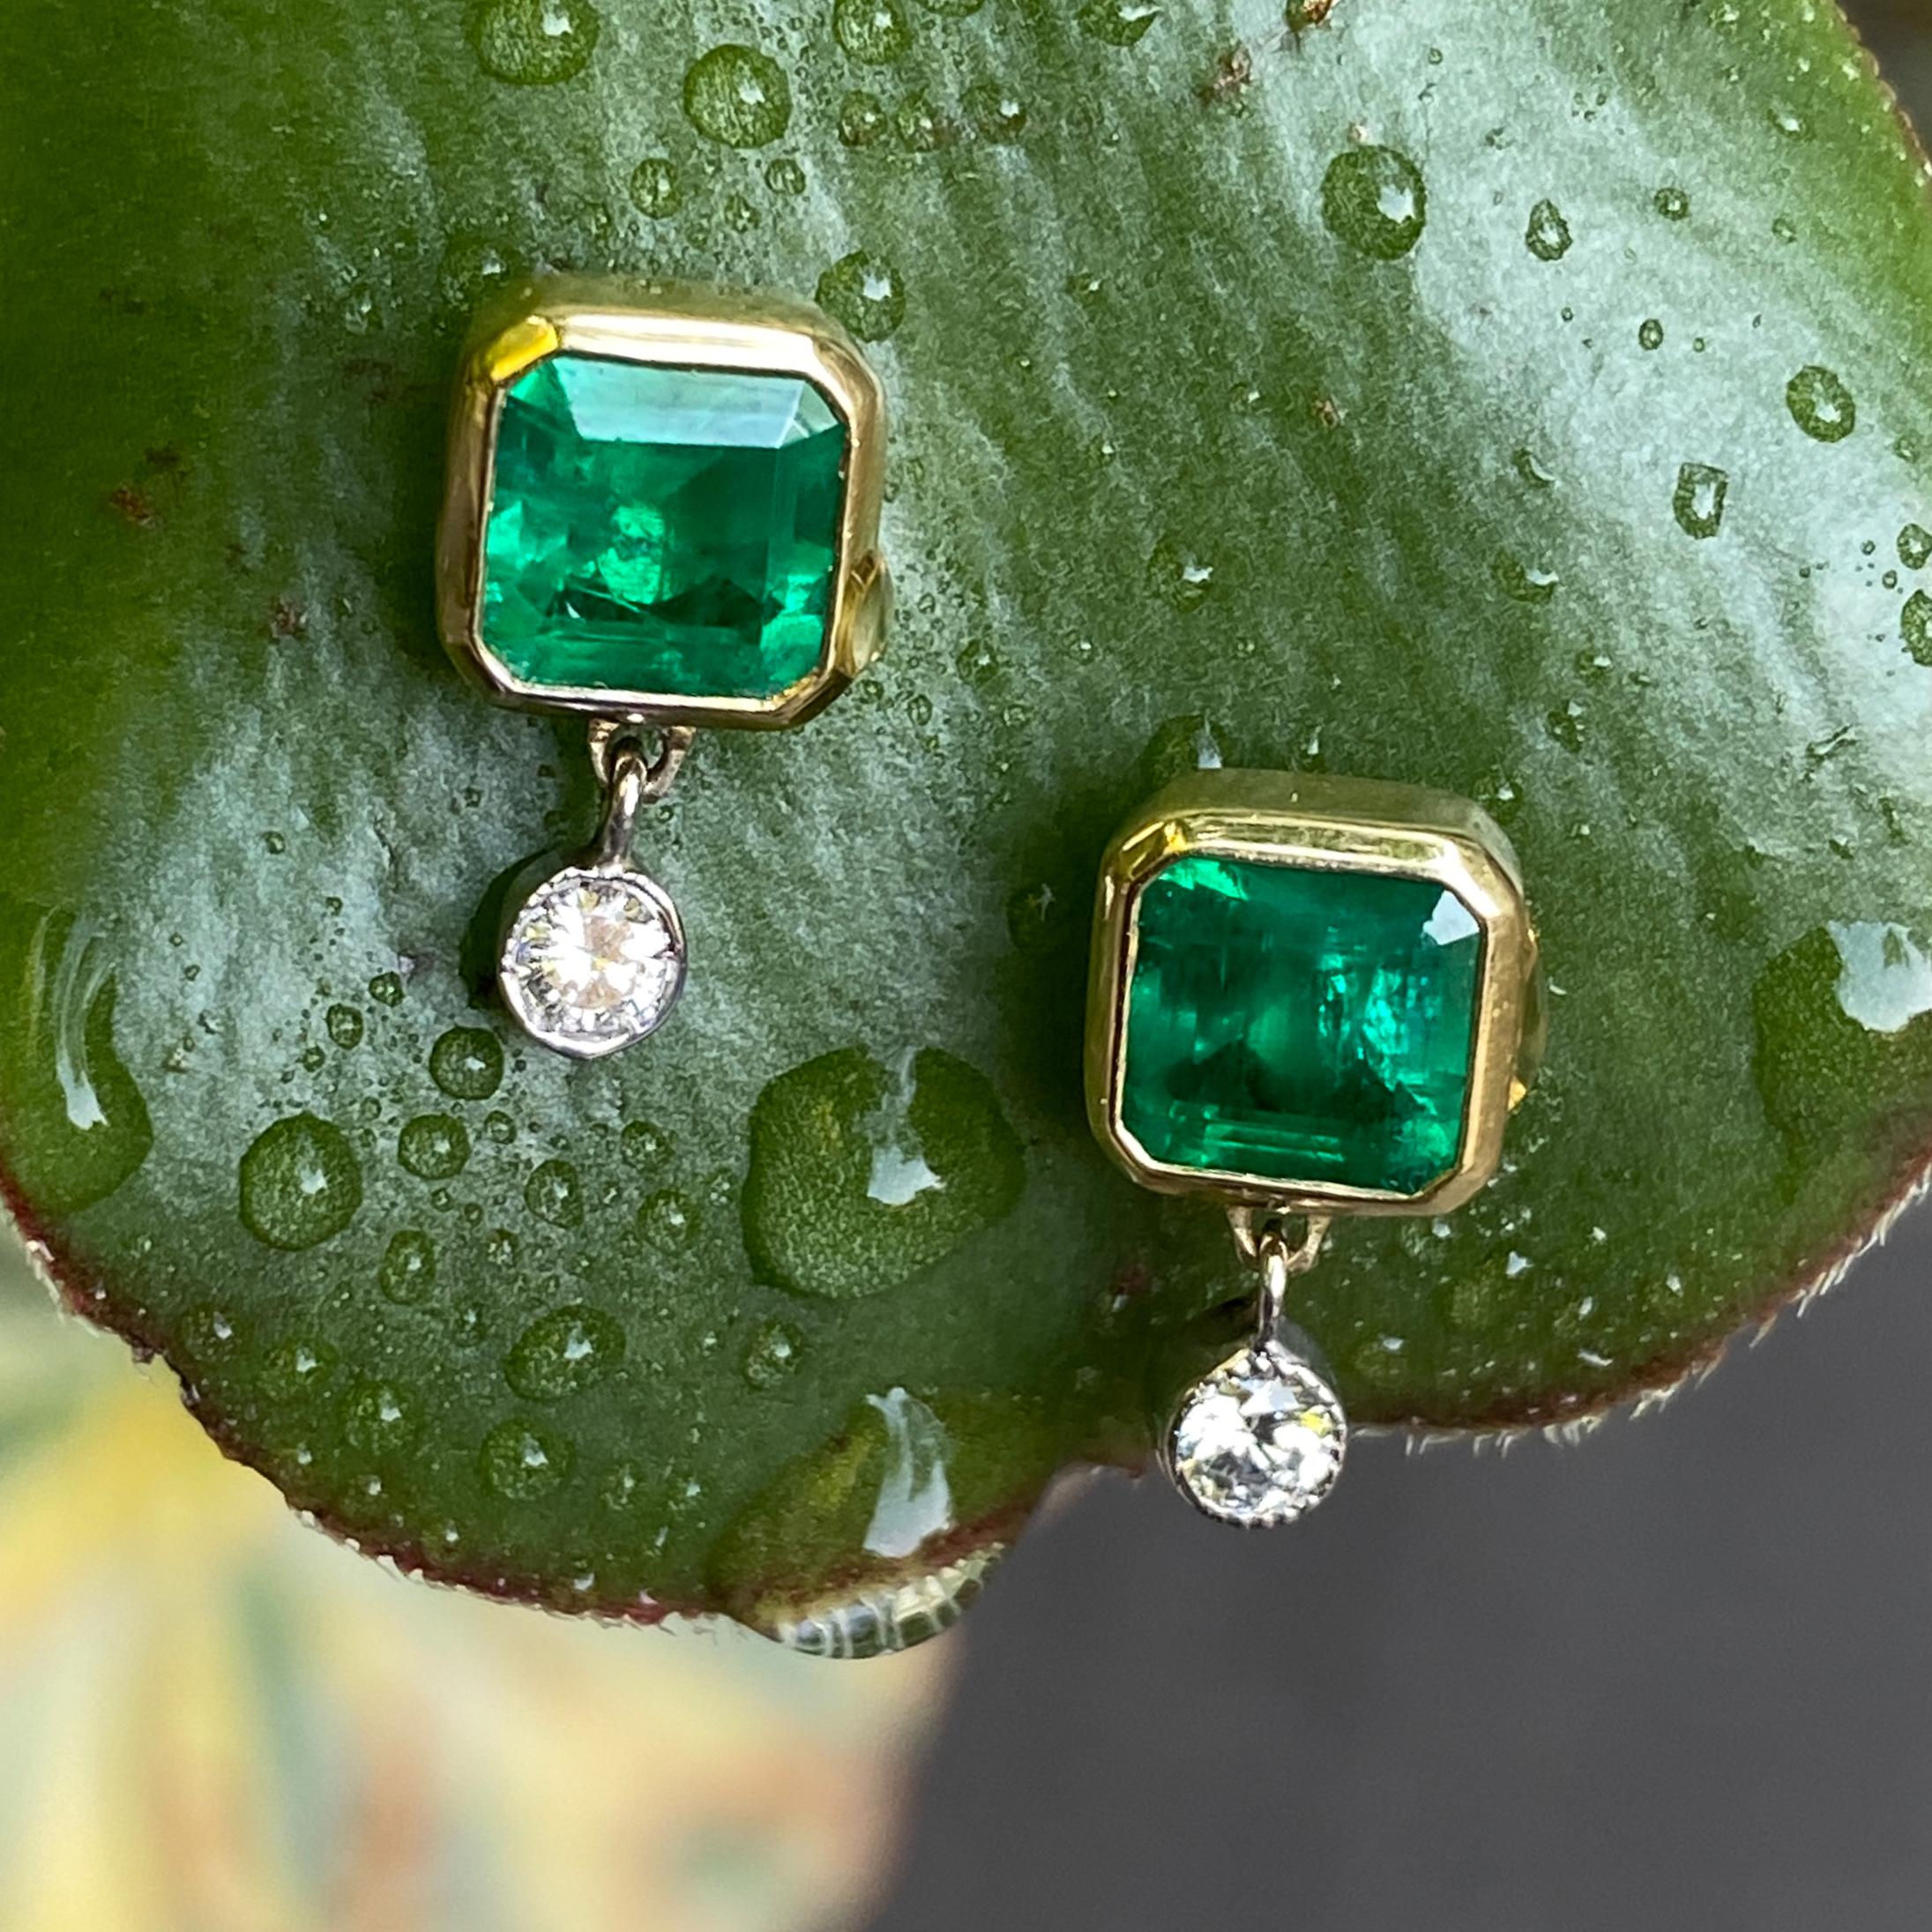 These gorgeous earrings by Eytan Brandes feature two natural Colombian emeralds wrapped in bezels of 18 karat yellow gold with a couple of bright little diamonds swinging along for the ride.

The emeralds are cut corner squares (emerald cut